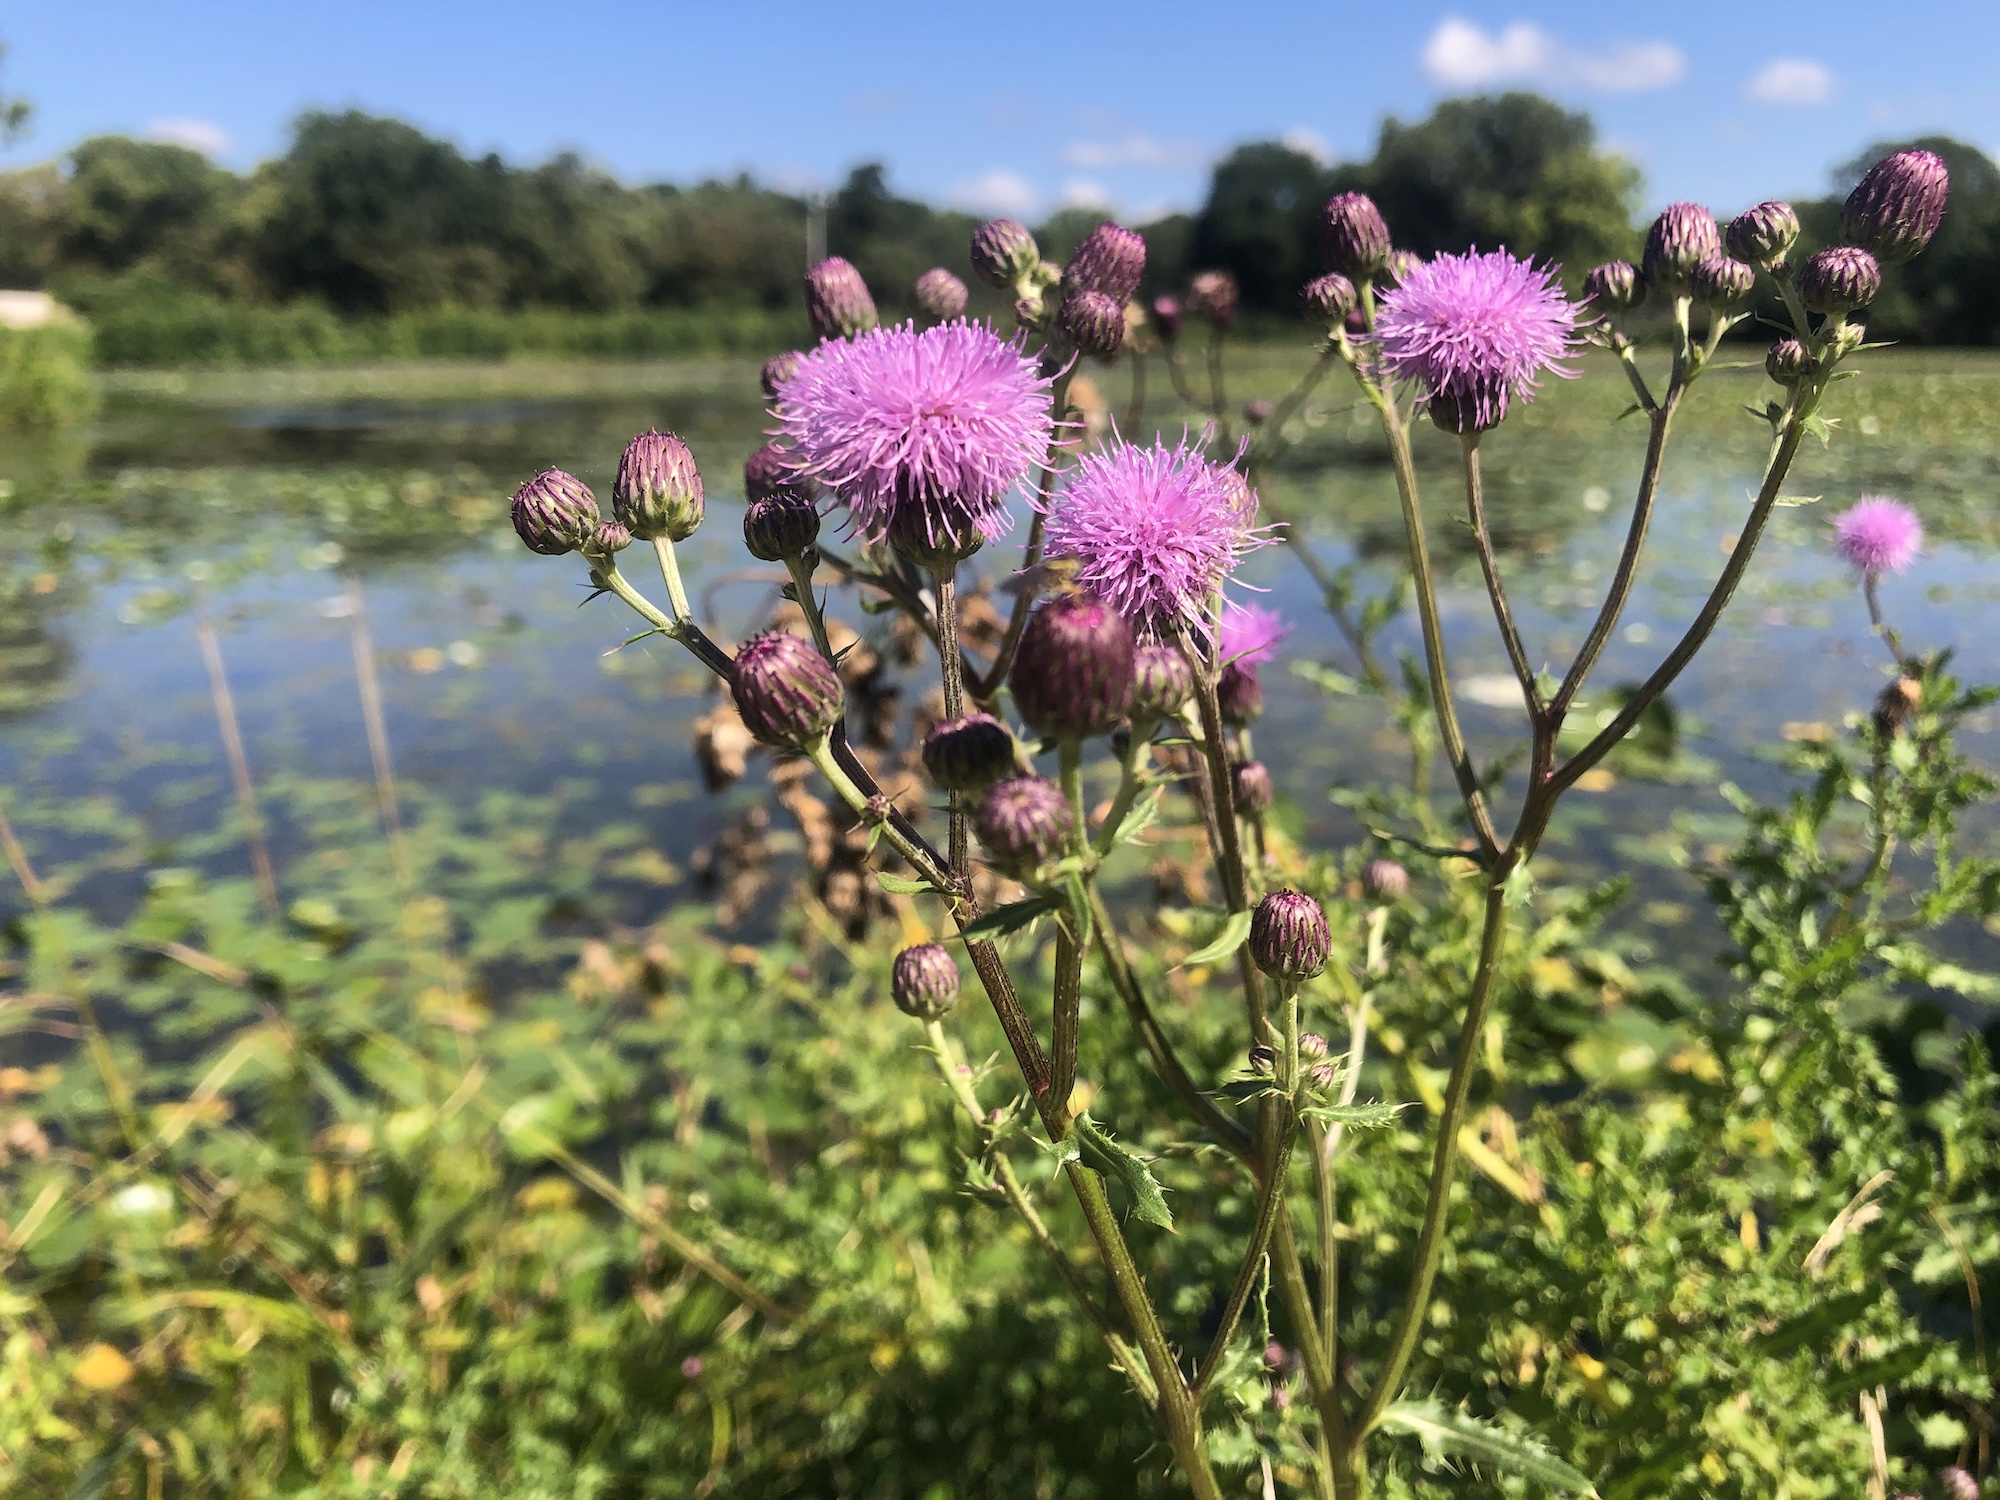 Canada Thistle on the shore of Vilas Park Lagoon in Vilas Park in Madison, Wisconsin on August 26, 2022.